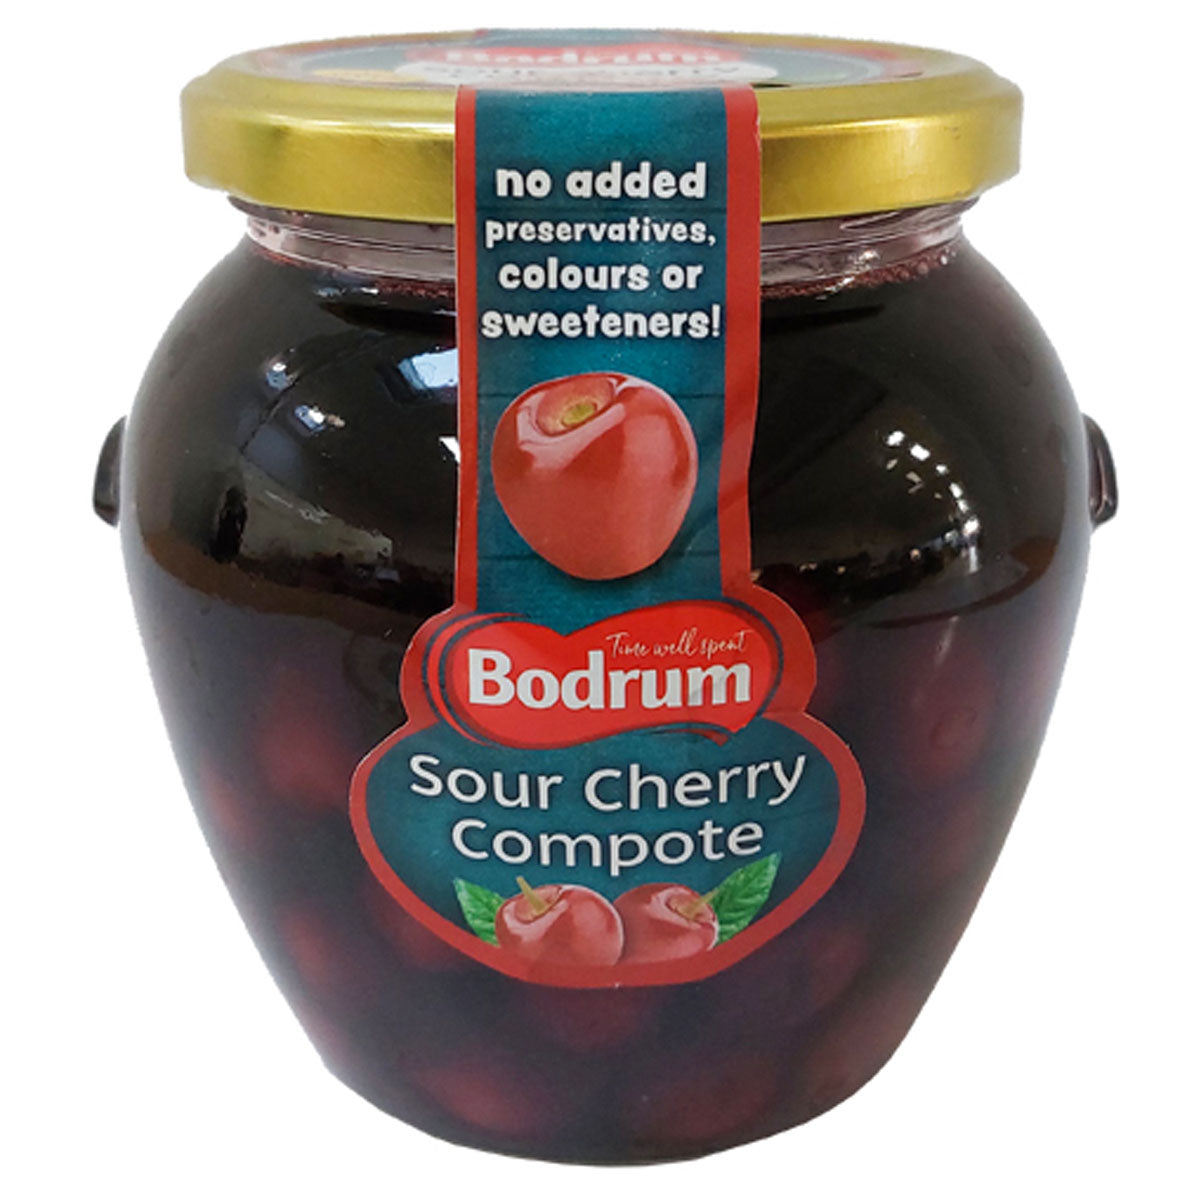 A jar of Bodrum - Sour Cherry Compote - 580g on a white background.